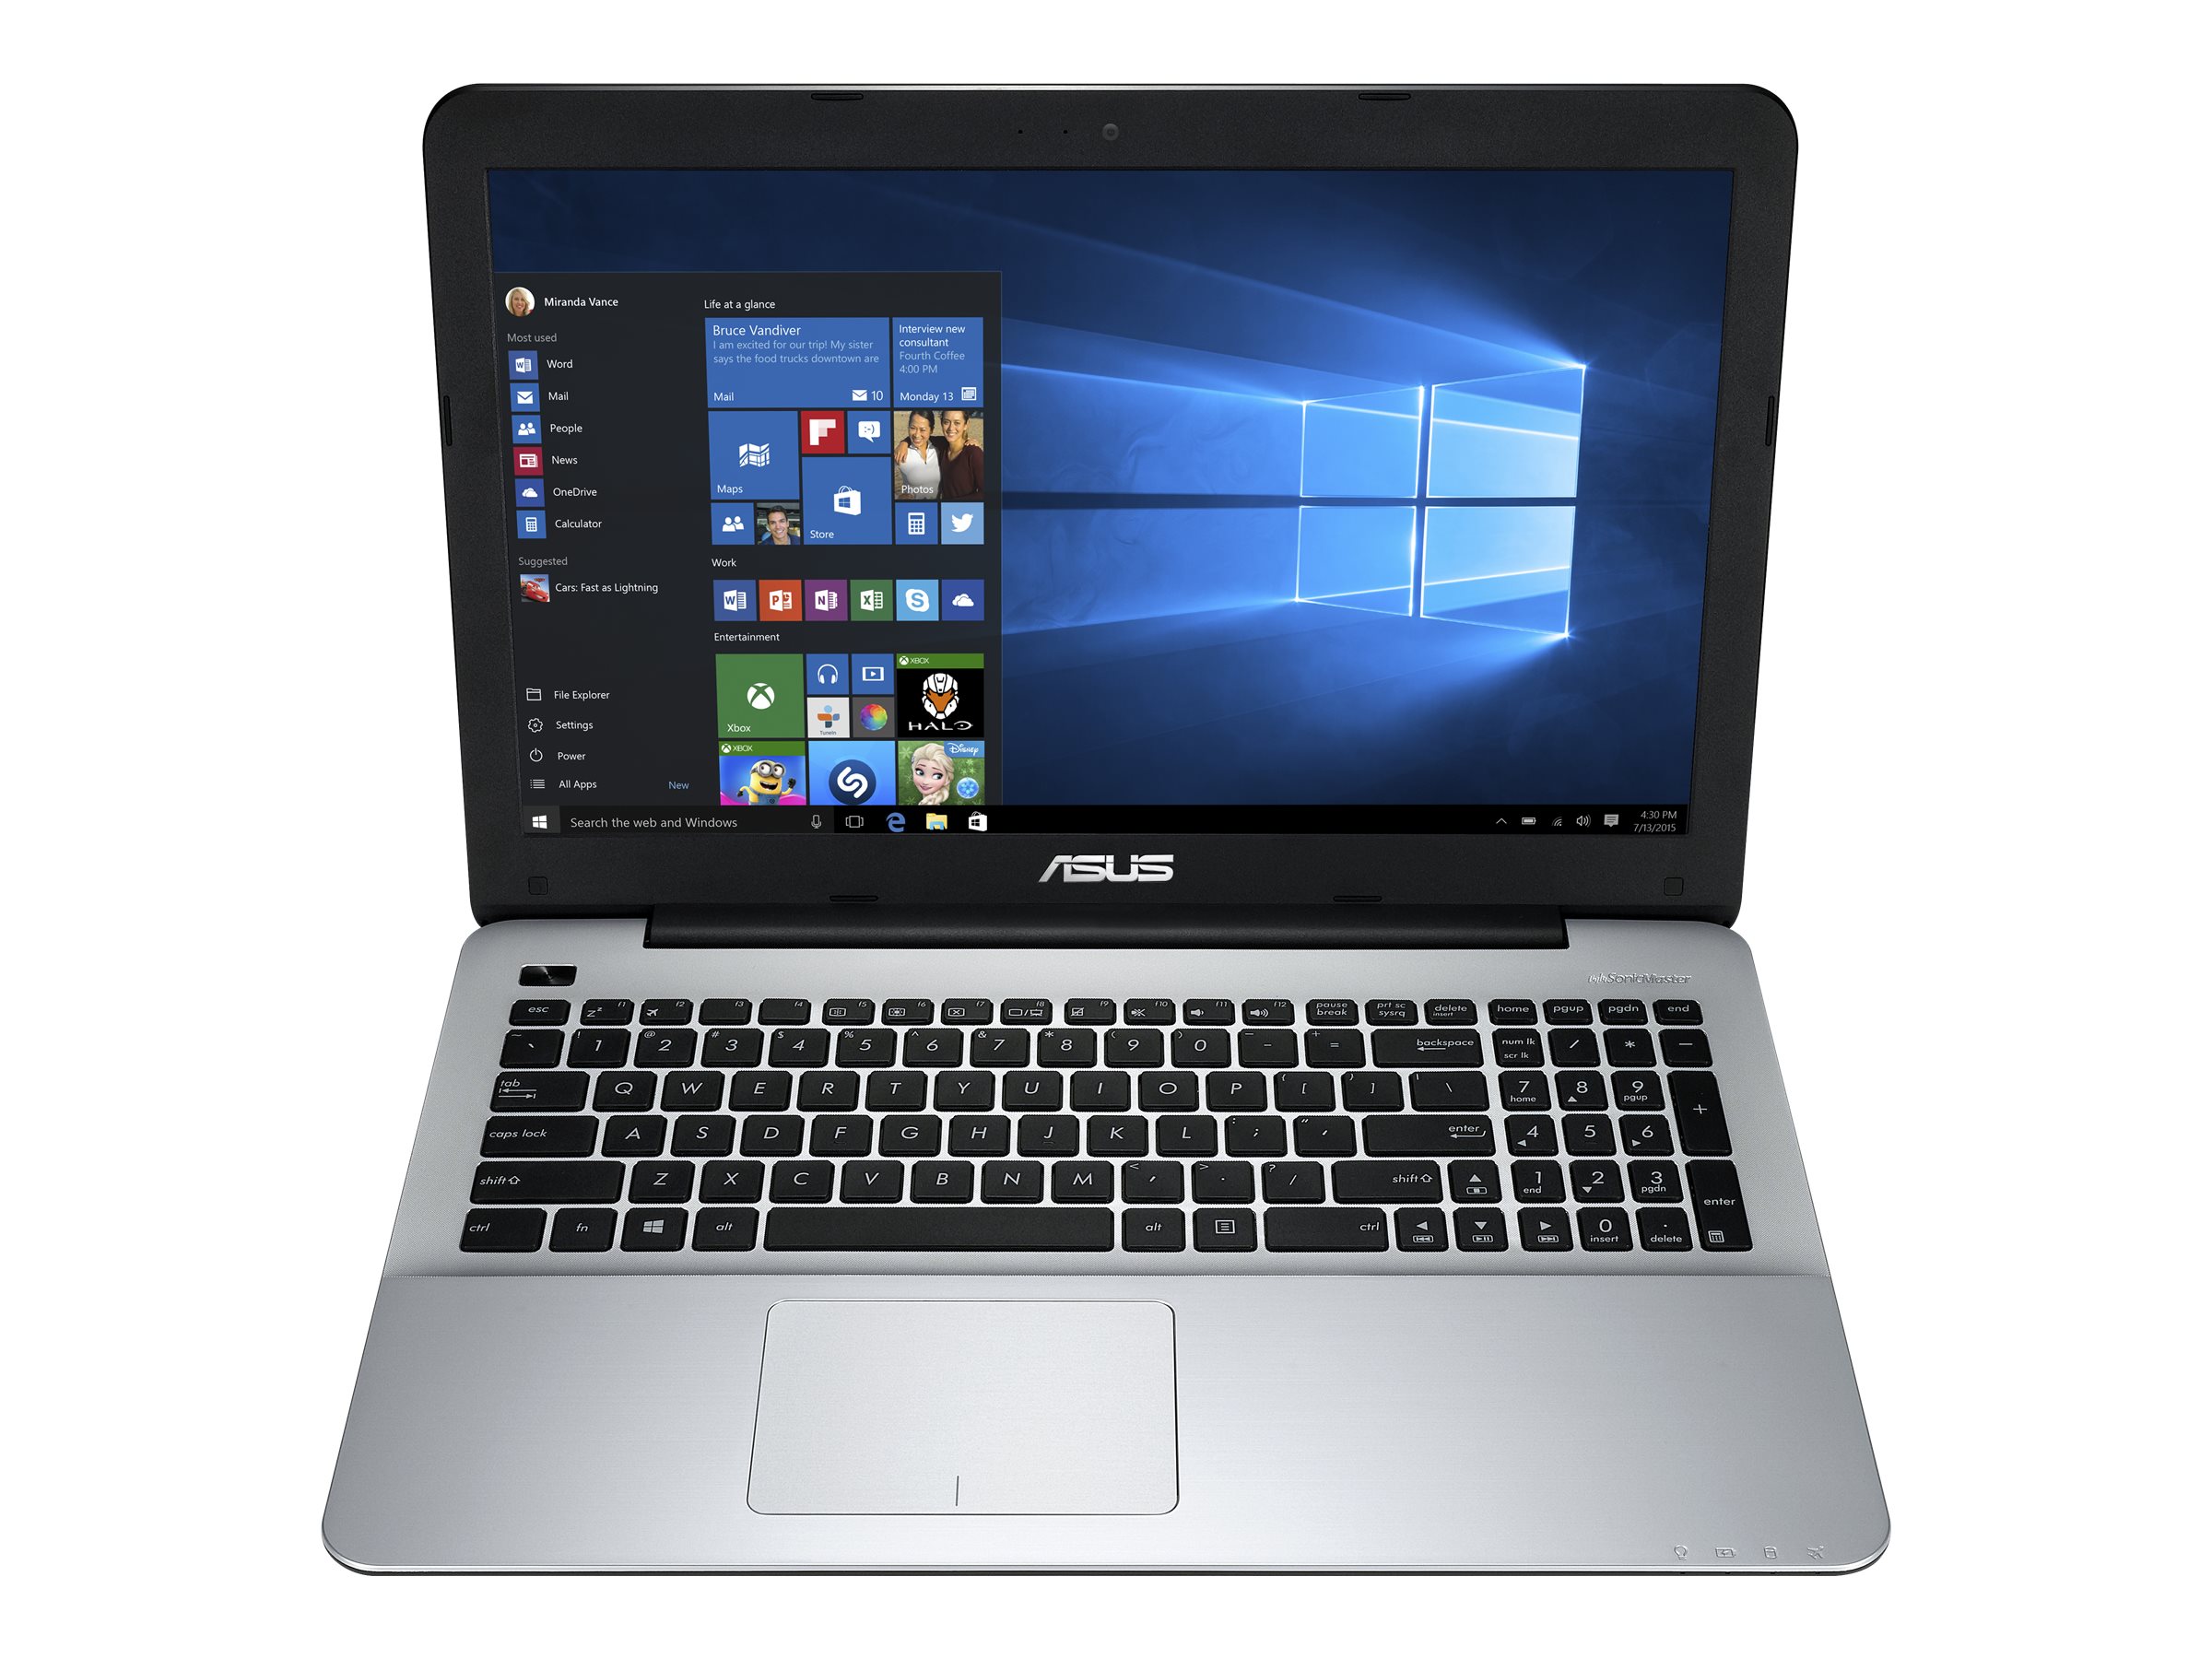 ASUS X555UA (XX089T) - full specs, details and review